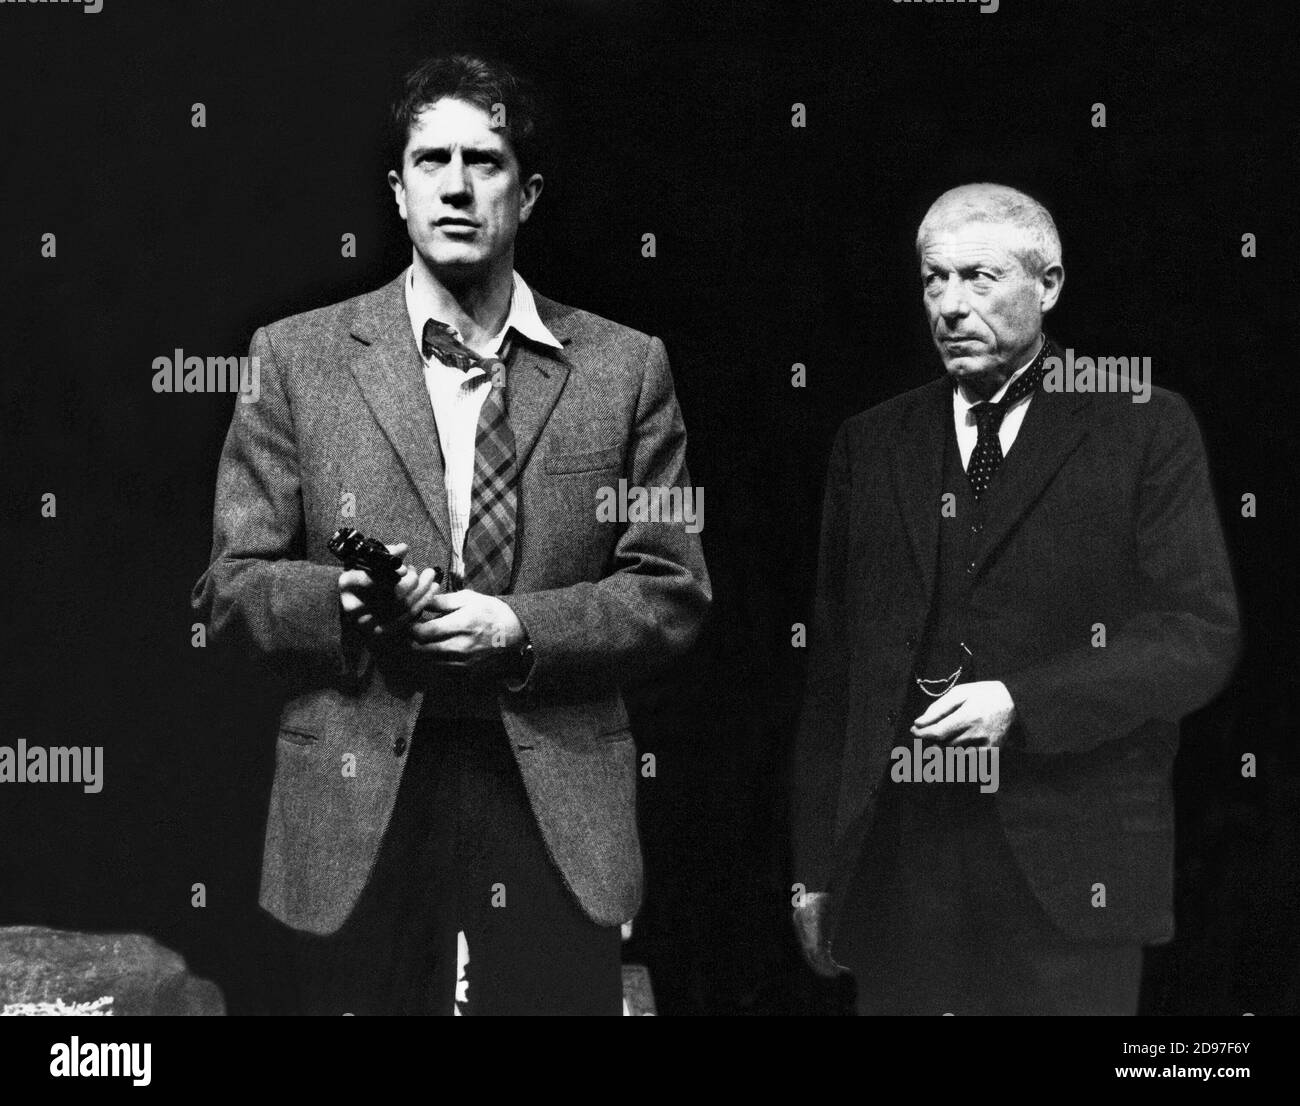 I HAVE BEEN HERE BEFORE  by J.B. Priestley  design: Norman Coates  lighting: Kevin Sleep  director: Matthew Francis  l-r: Brian Protheroe (Walter Ormund), John Woodvine (Dr Gortler)  Palace Theatre, Watford, England  05/04/1990                 (c) Donald Cooper/Photostage   photos@photostage.co.uk   ref/BW-P-122-11 Stock Photo